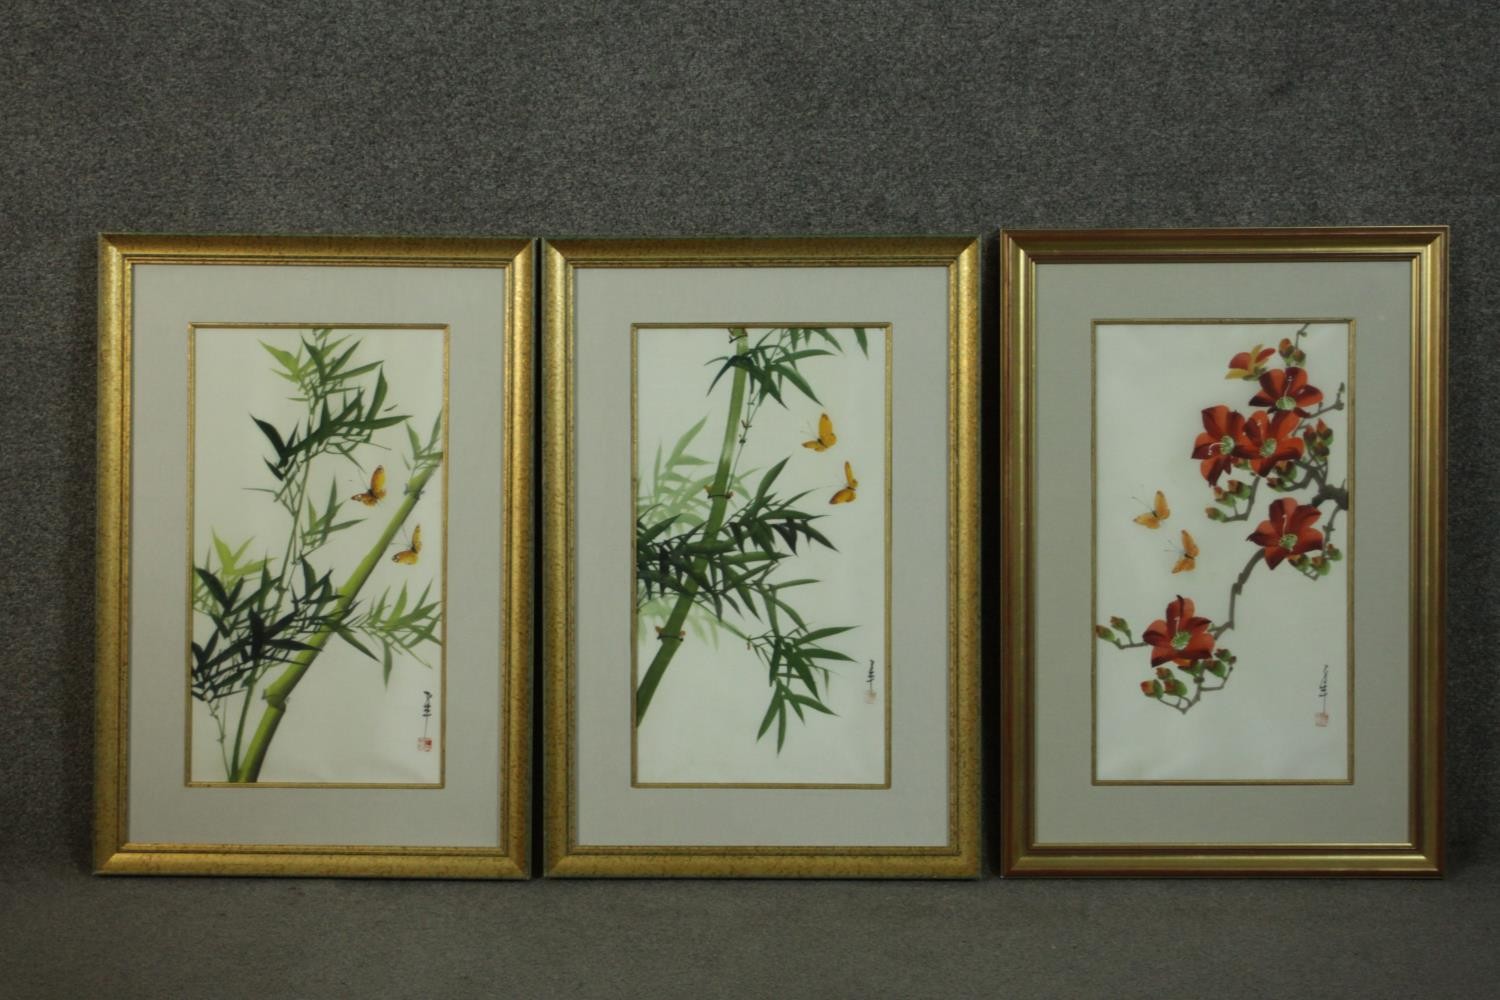 Three framed and glazed Chinese inks on silk depicting flowers, foliage and insects. Each with